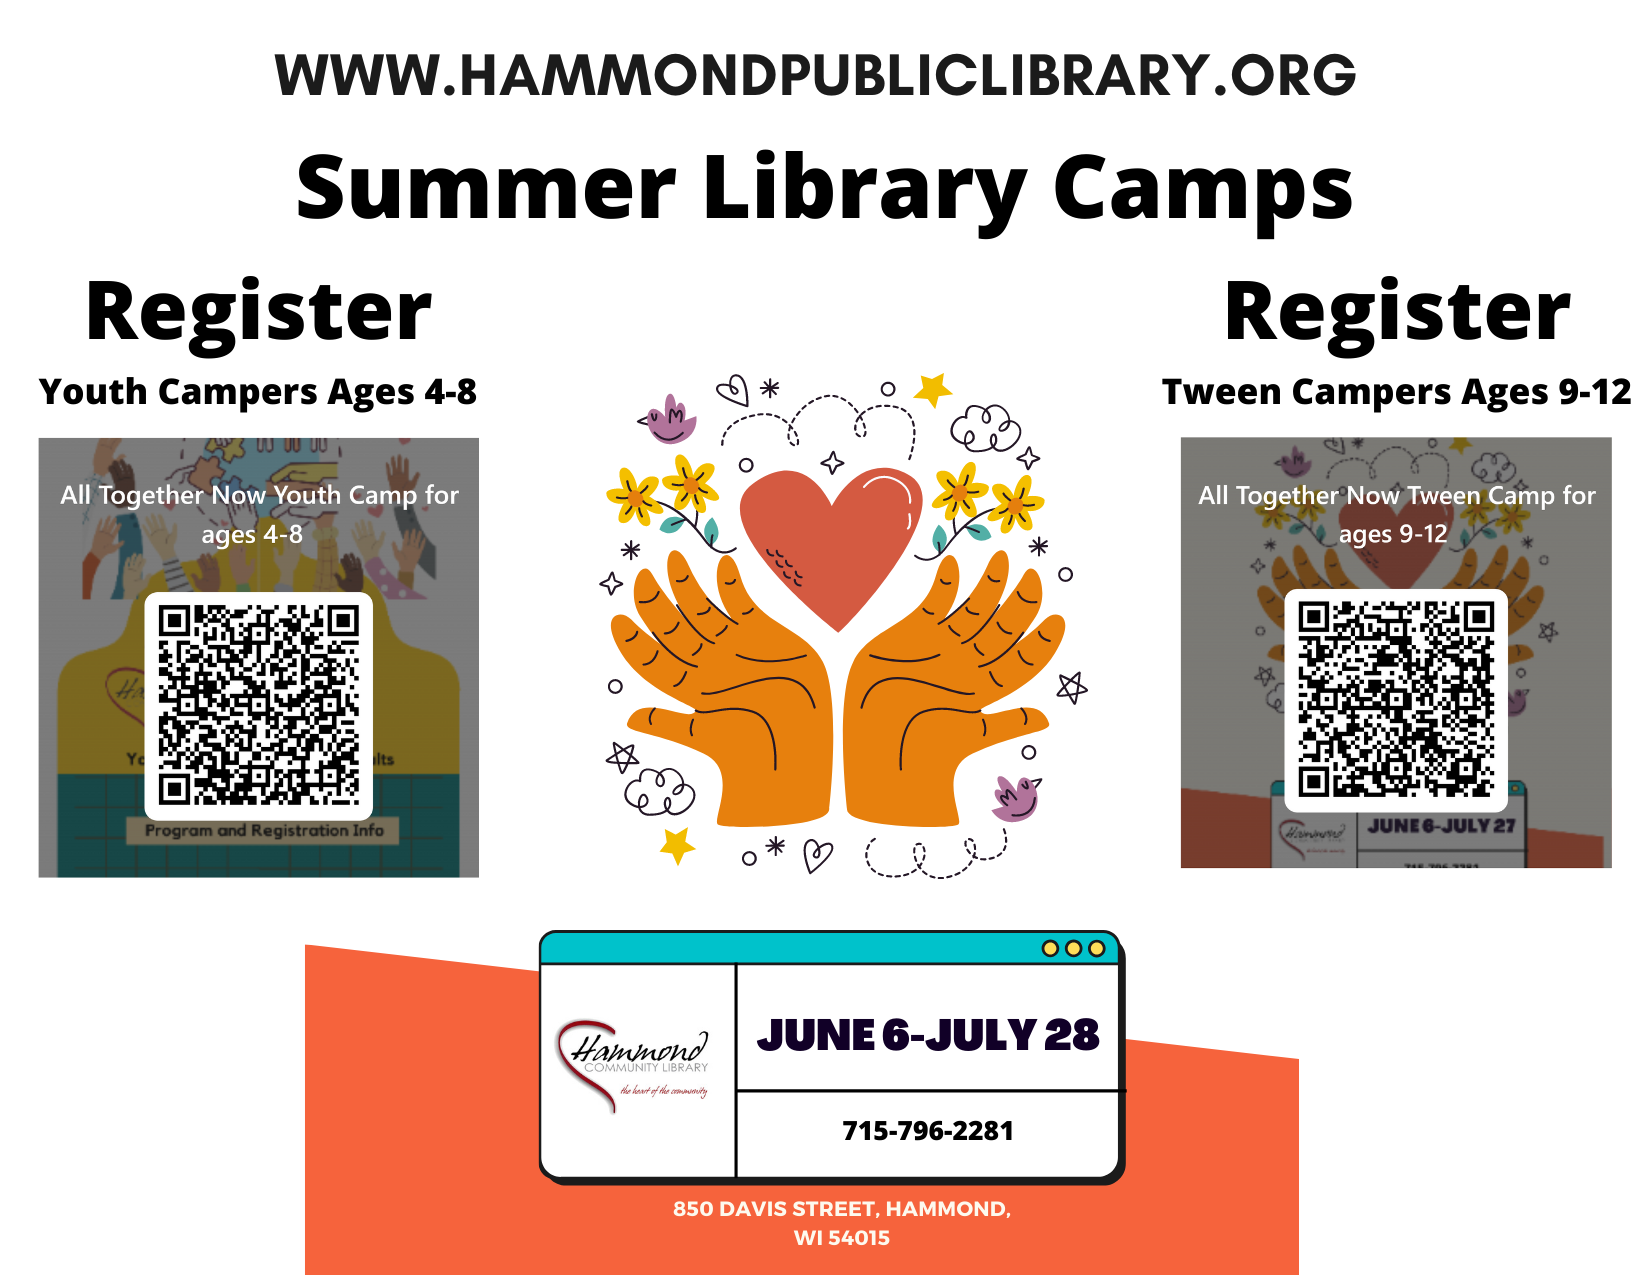 Summer Library Camps are BACK!